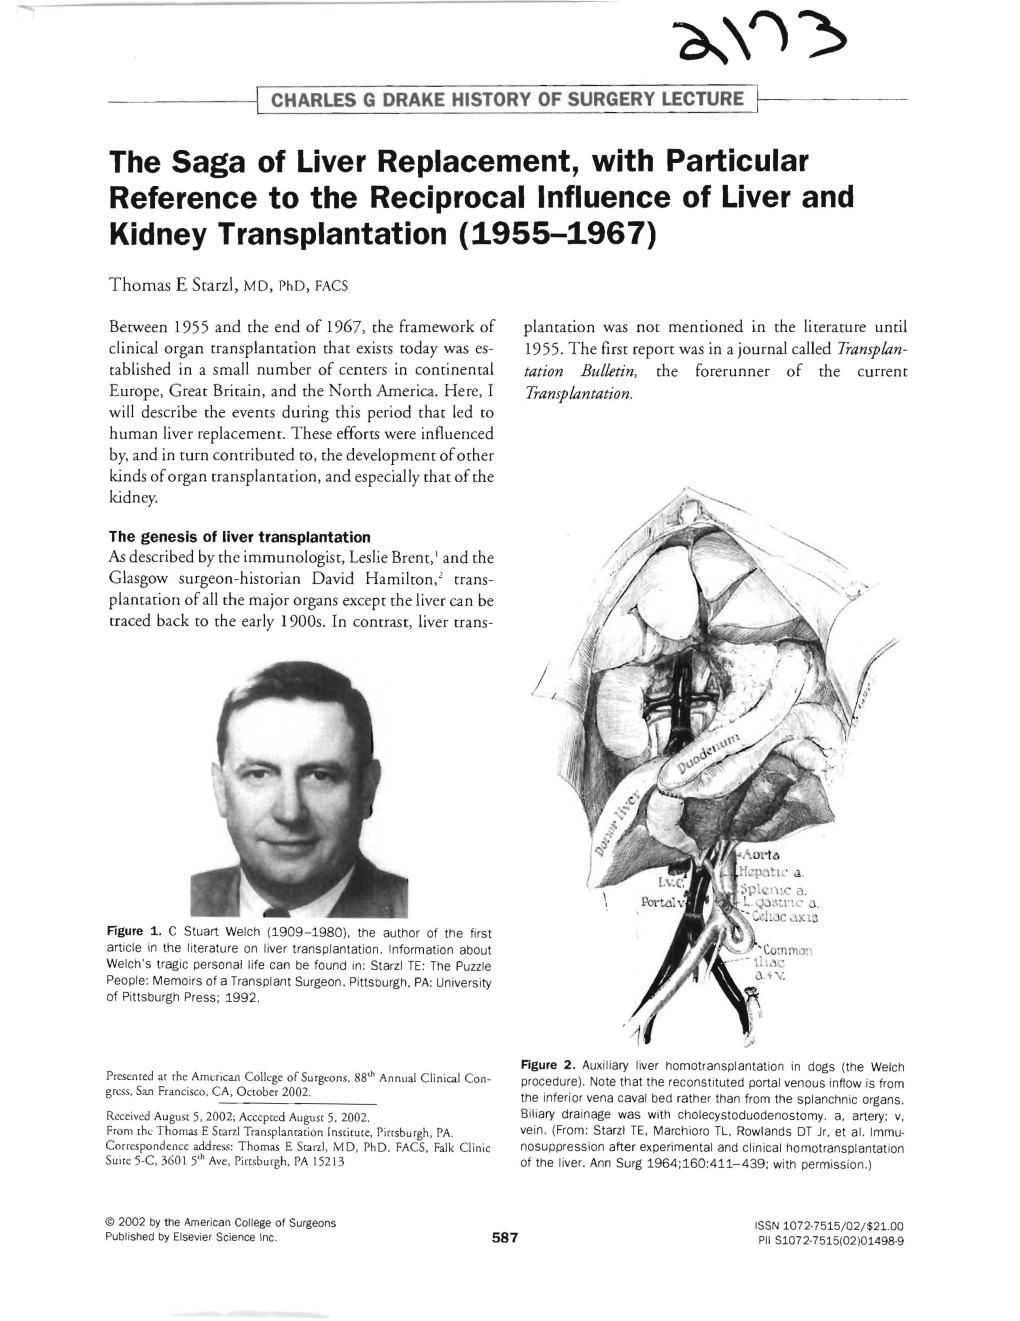 The Saga of Liver Replacement, with Particular Reference to the Reciprocal Influel1ce of Liver and Kidney Transplantation (1955-1967)